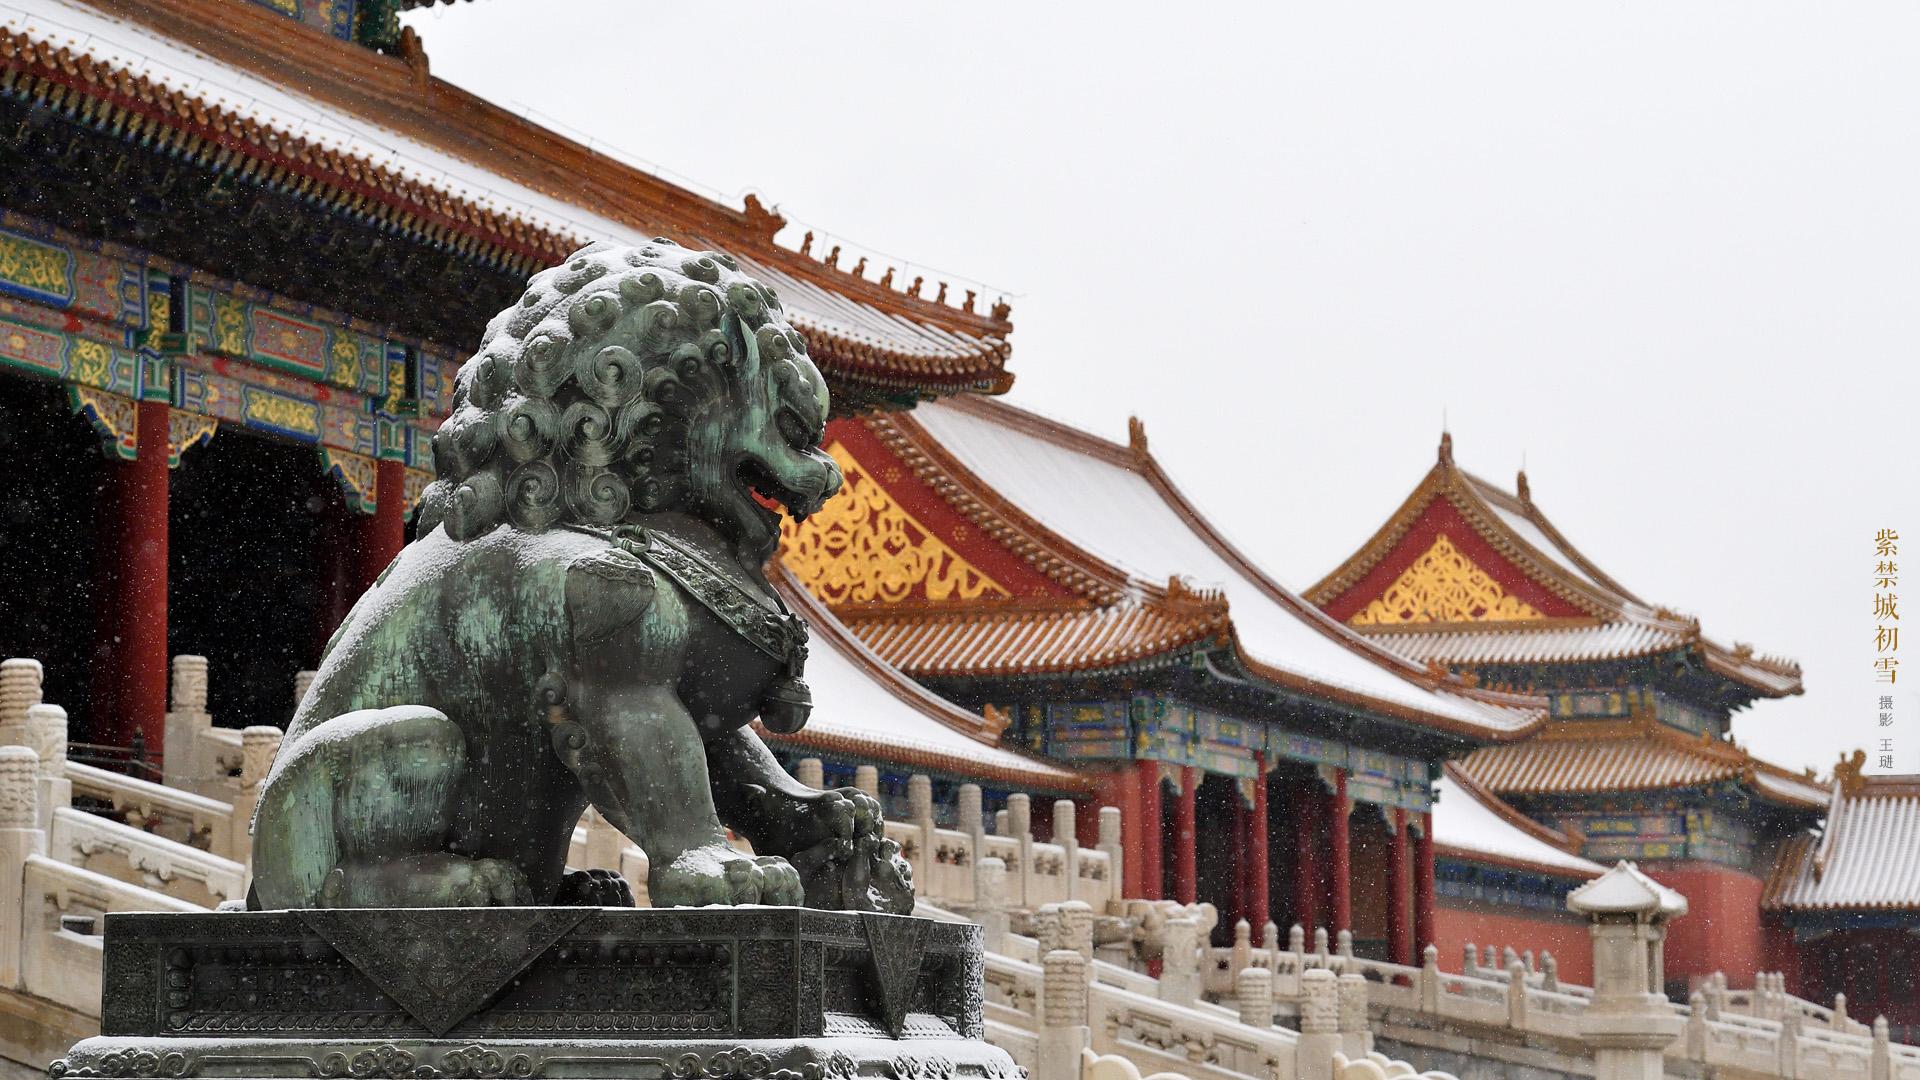 General 1920x1080 The Imperial Palace Chinese architecture snow architecture Asian architecture Beijing China